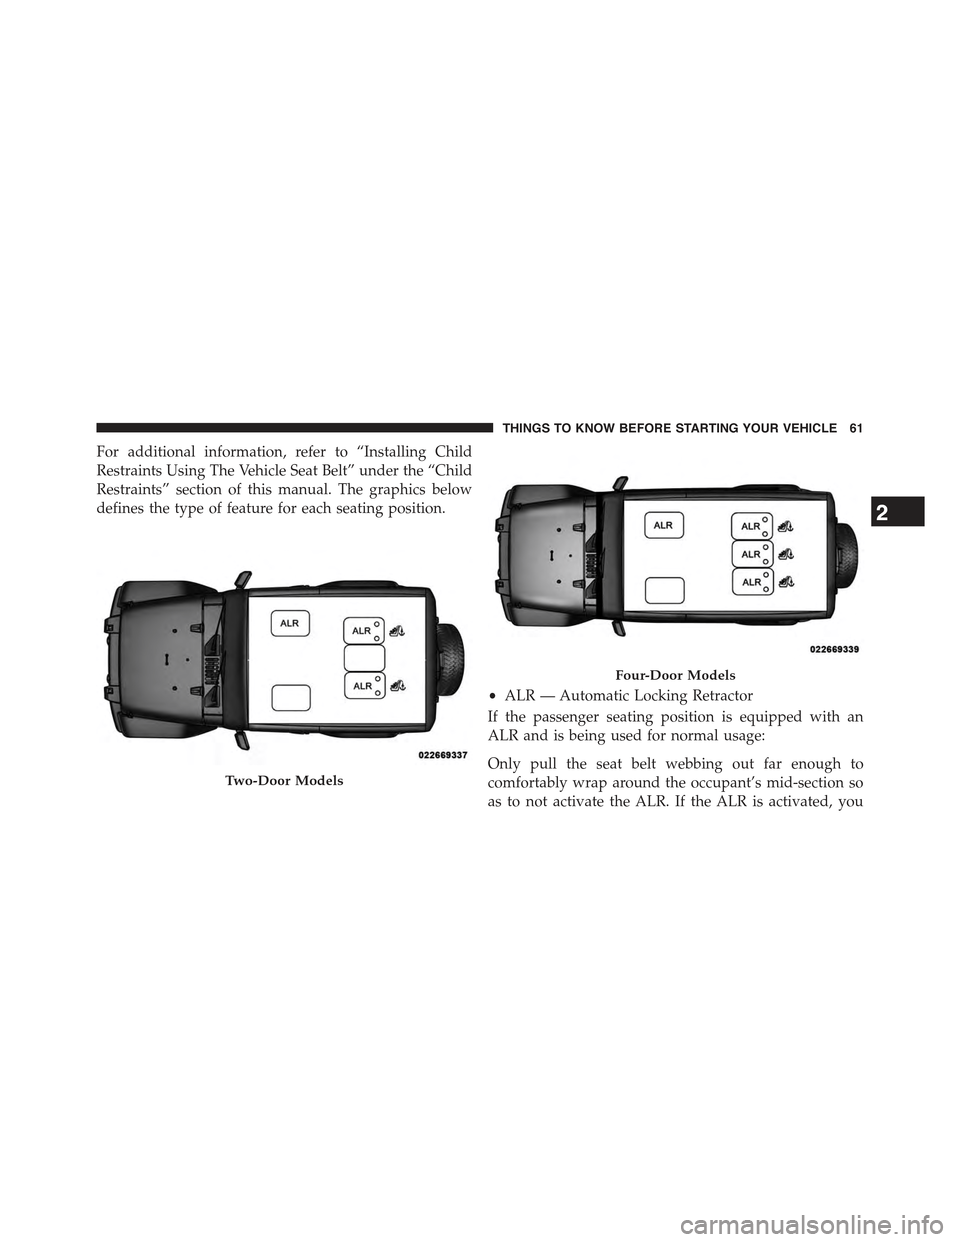 JEEP WRANGLER 2015 JK / 3.G Owners Manual For additional information, refer to “Installing Child
Restraints Using The Vehicle Seat Belt” under the “Child
Restraints” section of this manual. The graphics below
defines the type of featu